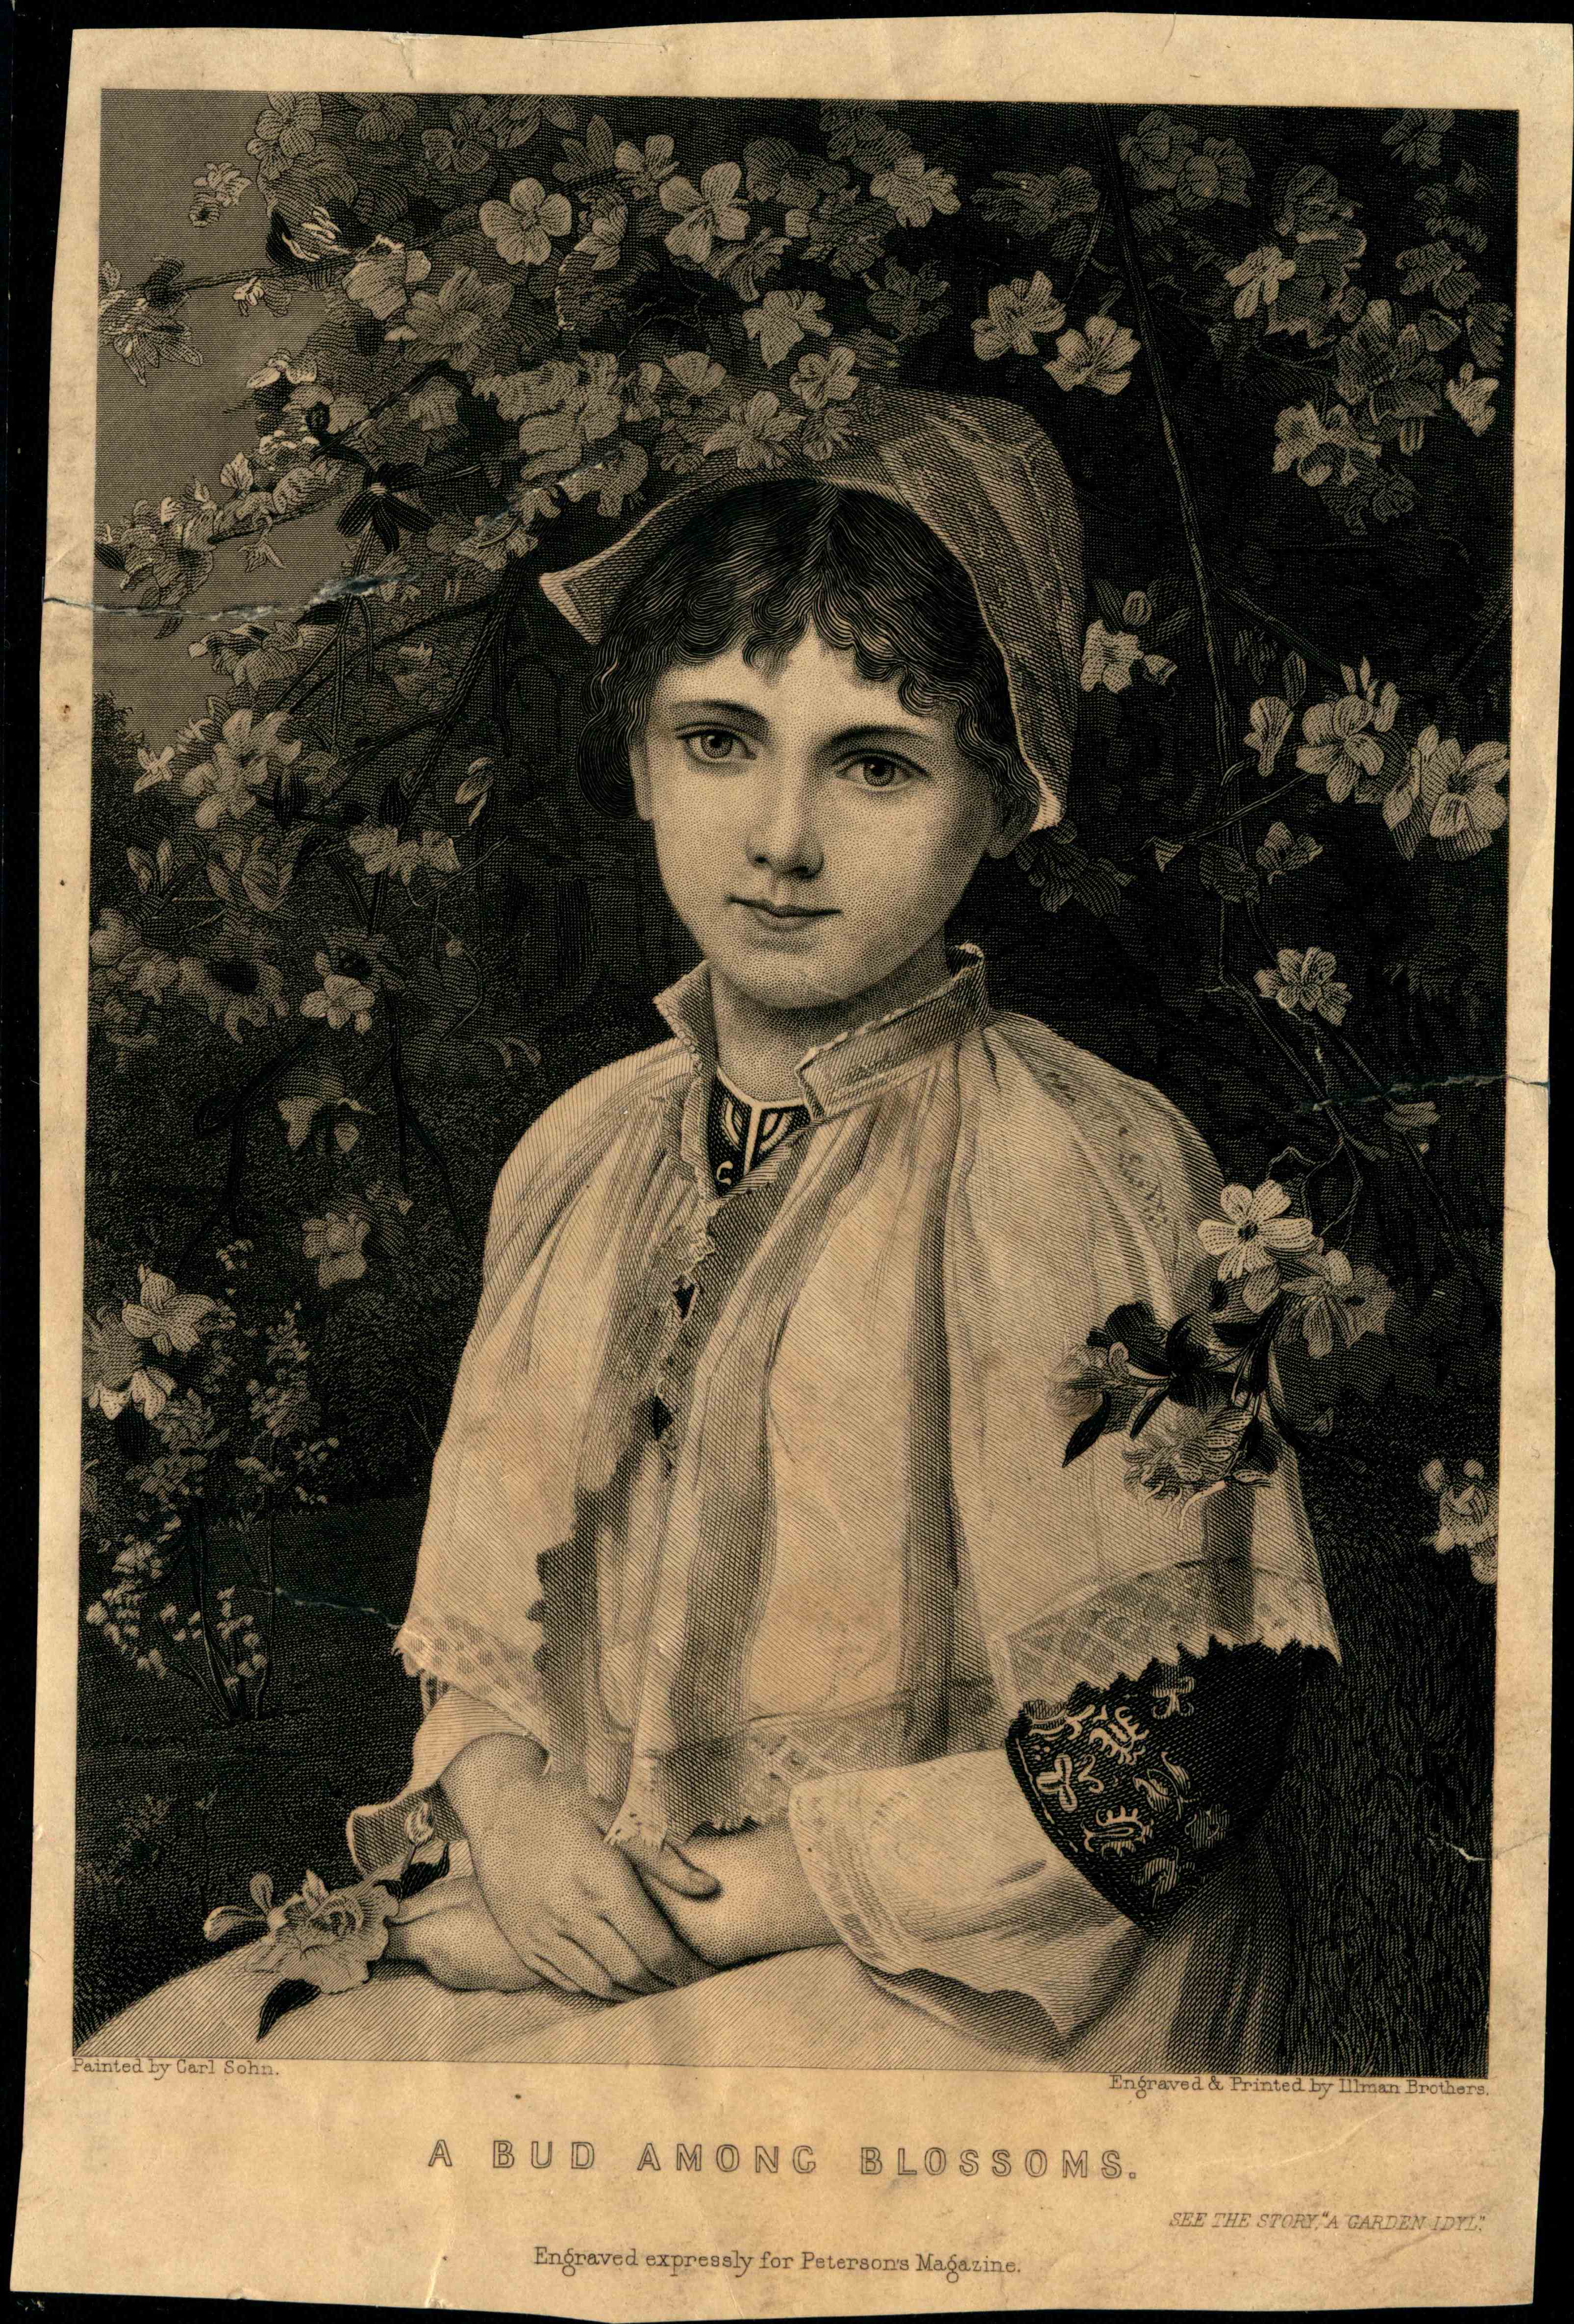 Print of Illman Brothers engraving showing a young girl sitting under a branch of blossoms wearing clothes with fancy needlework and crochet trim. Petersons Magazine was an early 19th Century women's magazine.